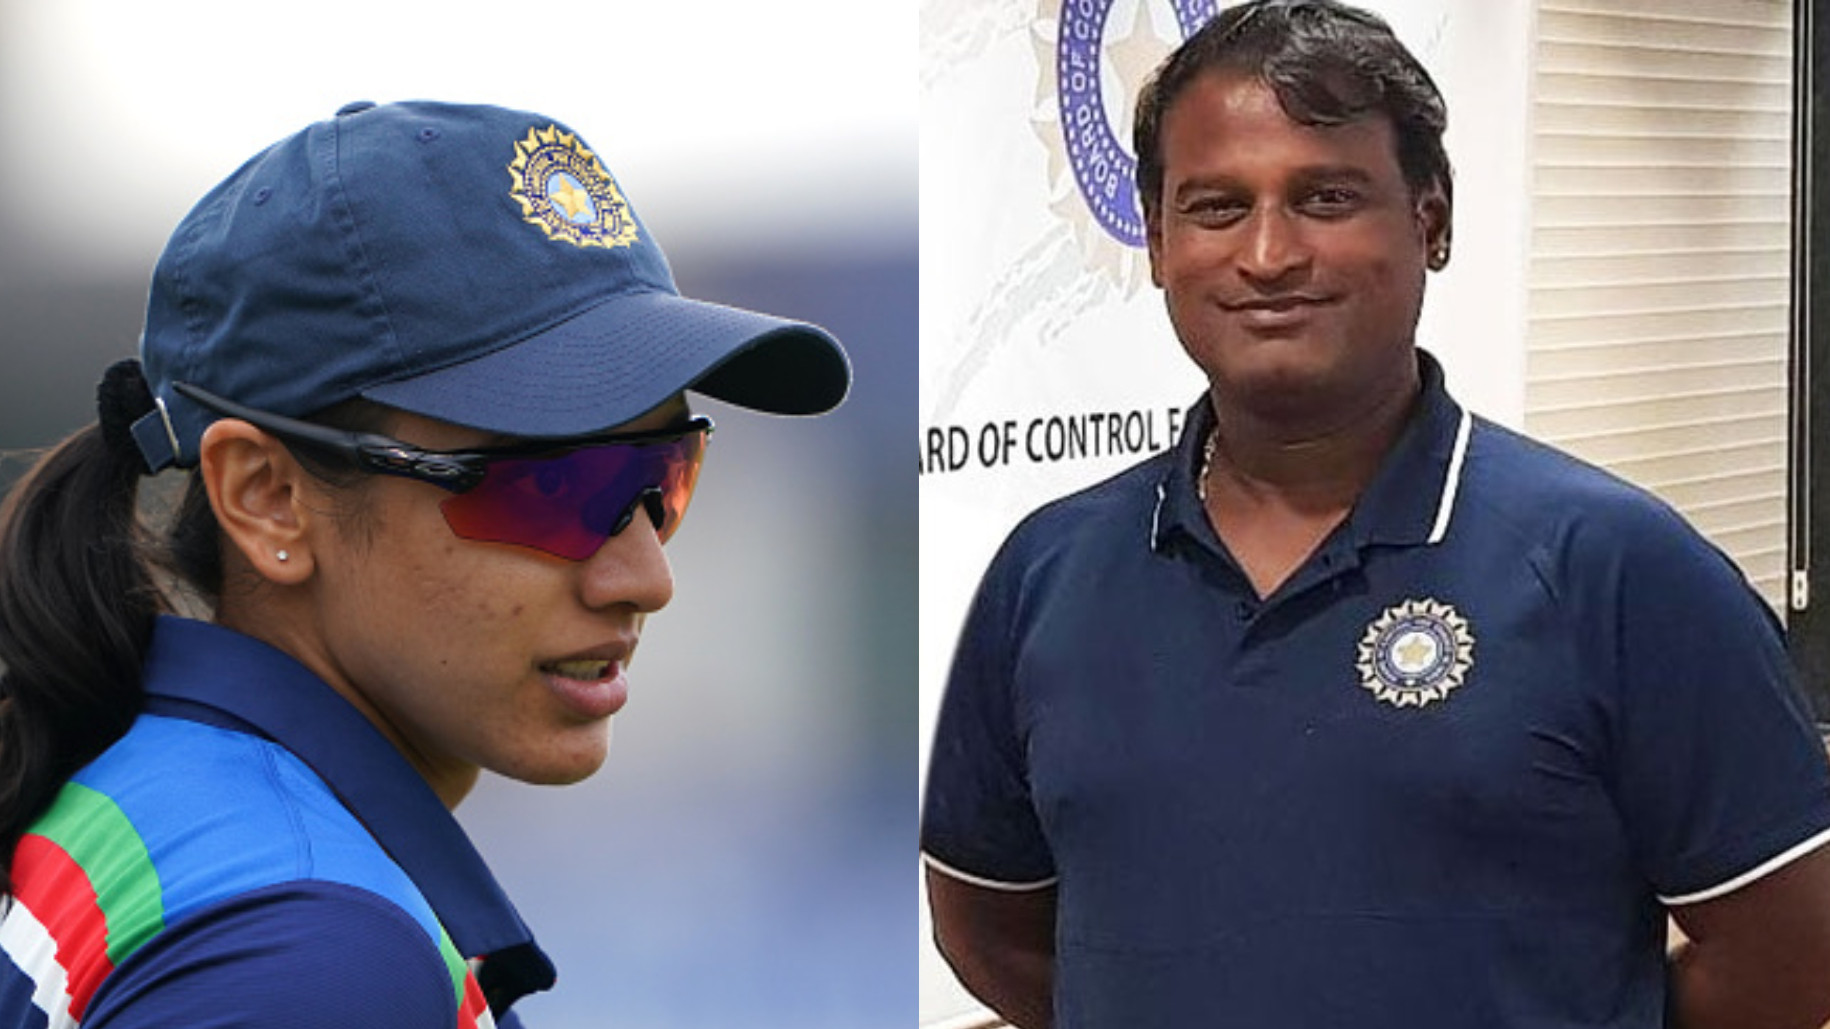 AUSW v INDW 2021: We look at Smriti Mandhana as a leader; she might lead Indian team in future - Powar